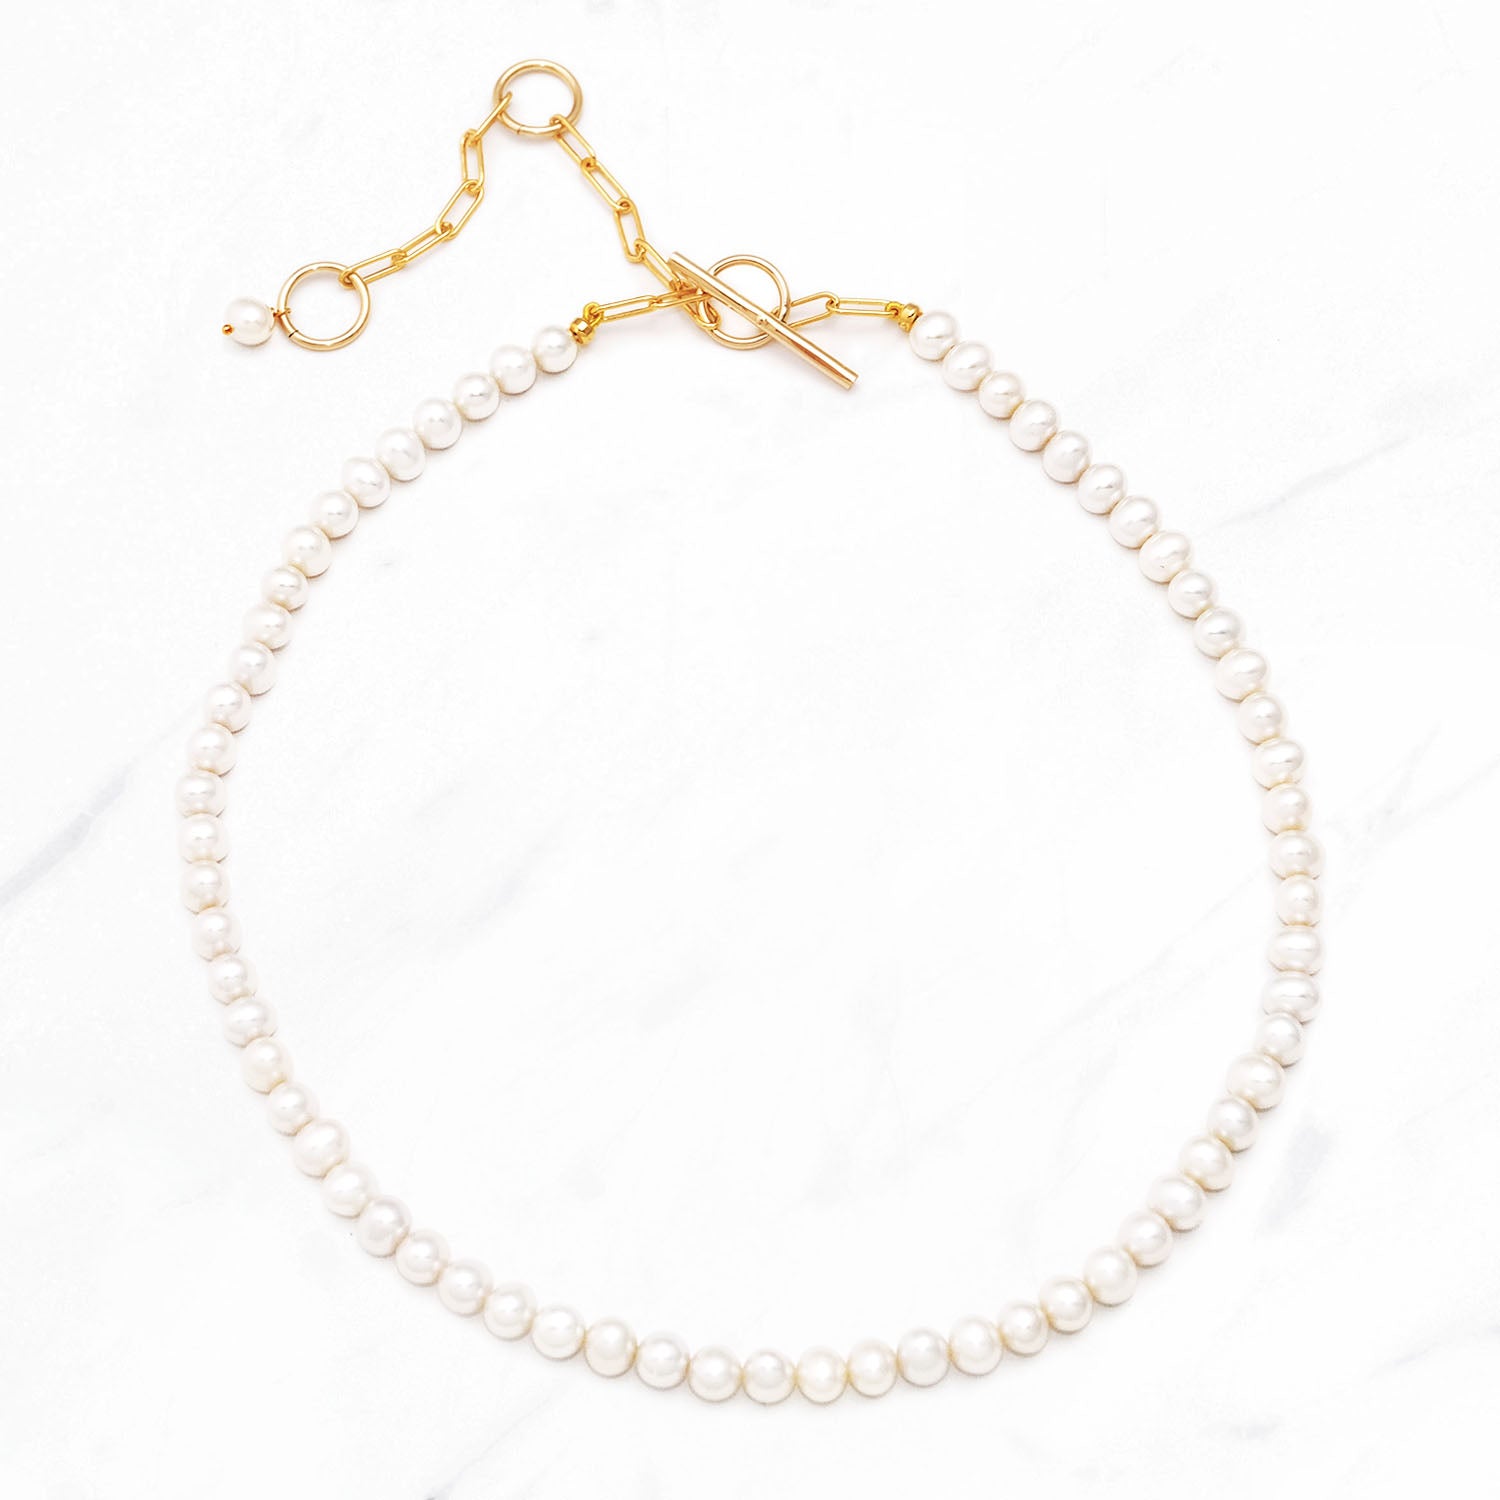 5mm Pearl Necklace (38cm)